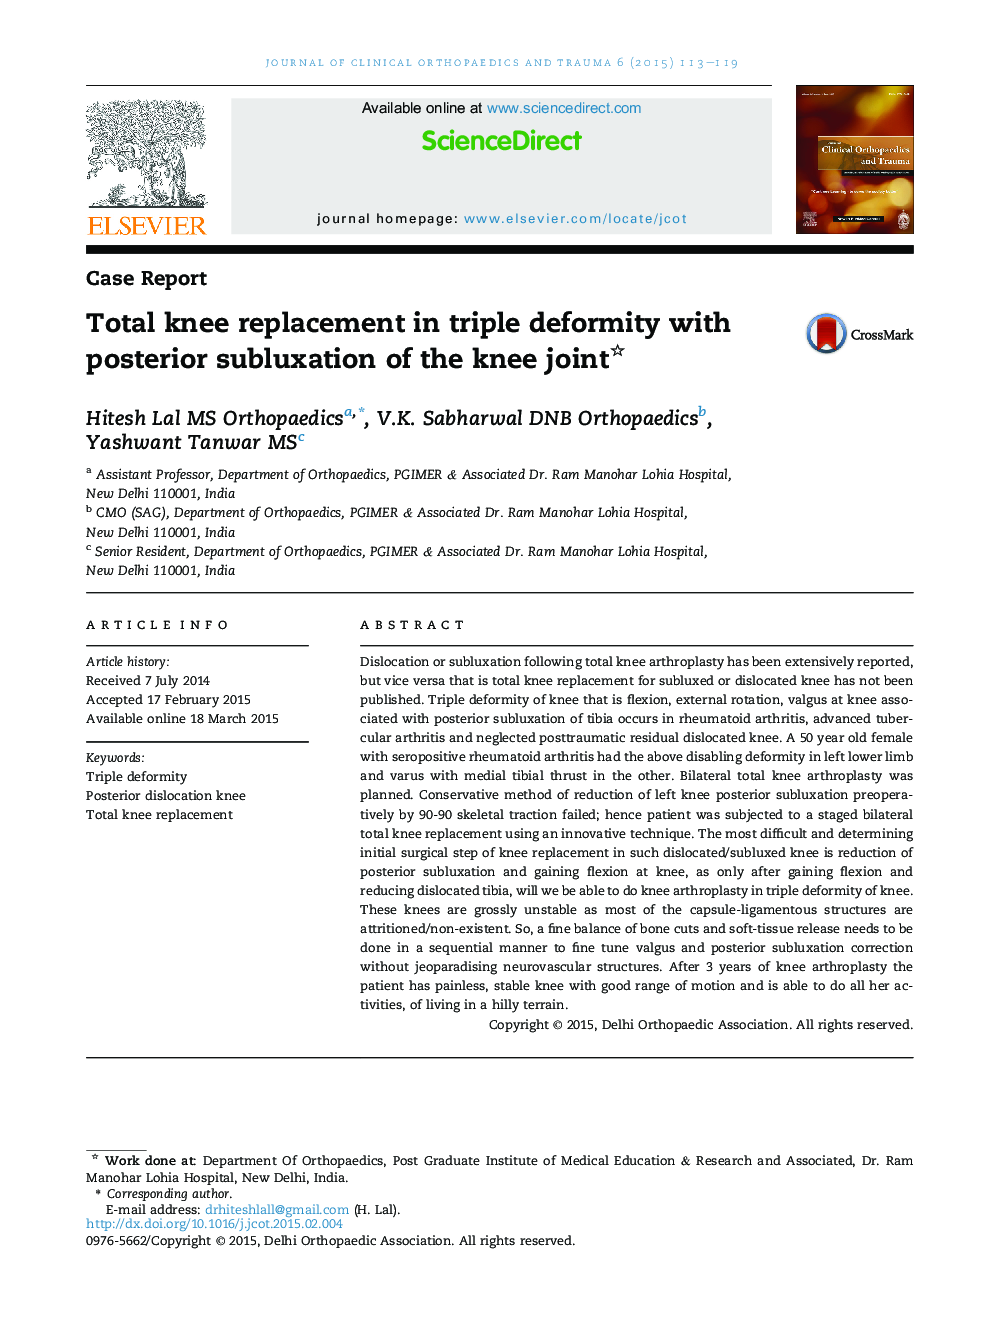 Total knee replacement in triple deformity with posterior subluxation of the knee joint 